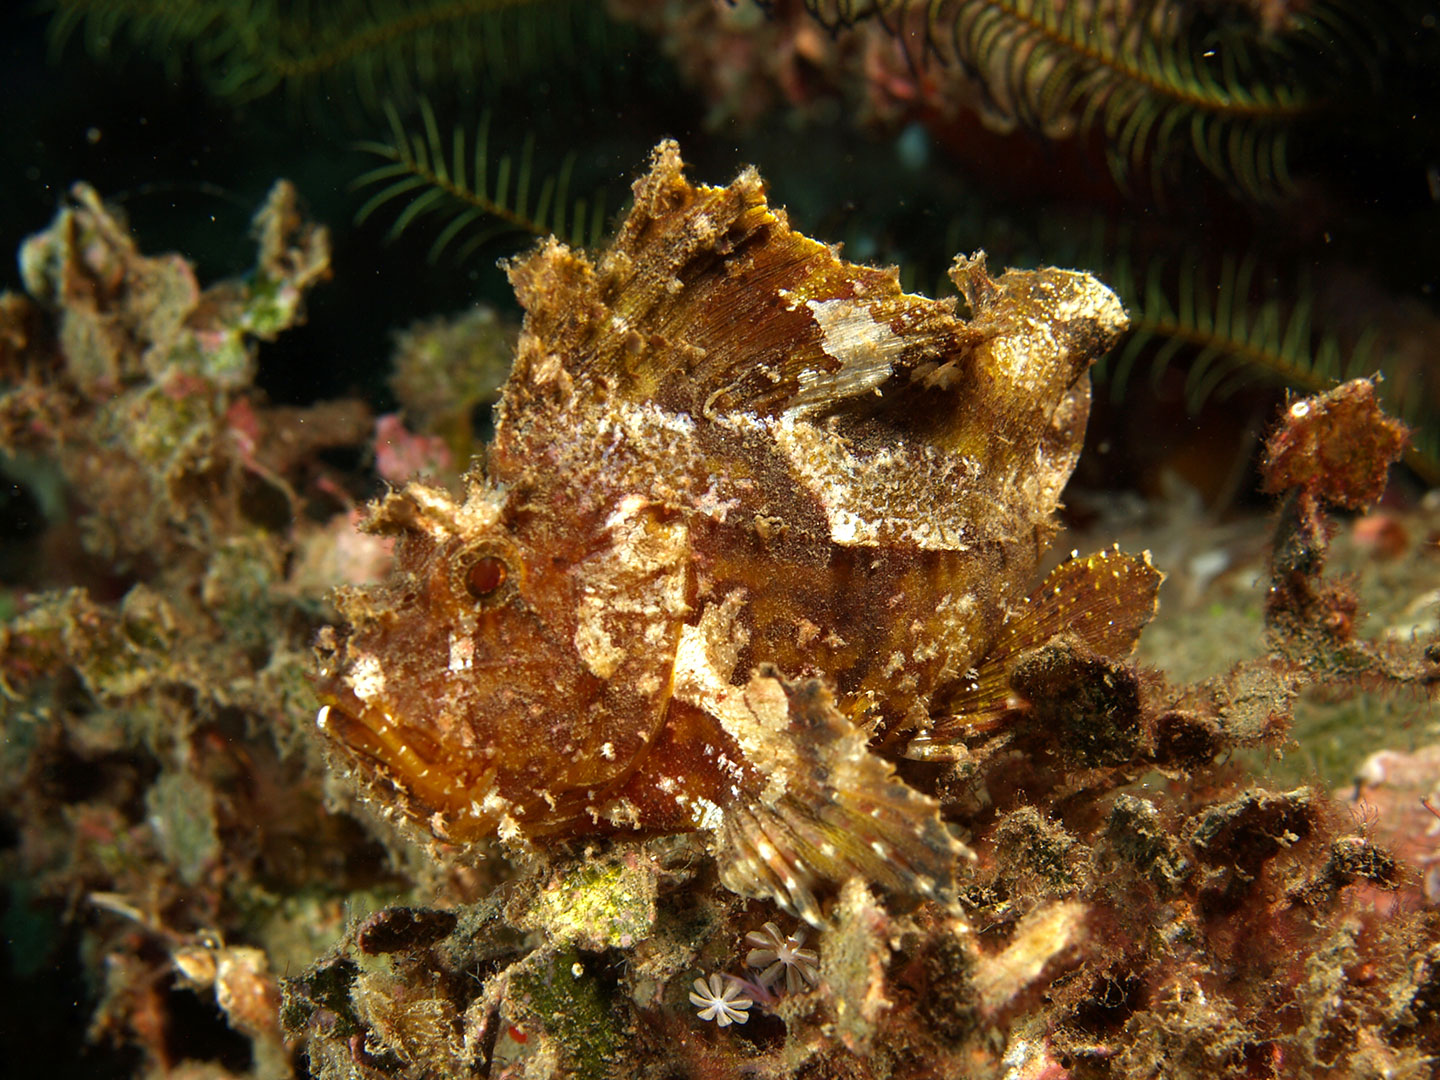 Leaf Scorpion Fish Blending in With Plants